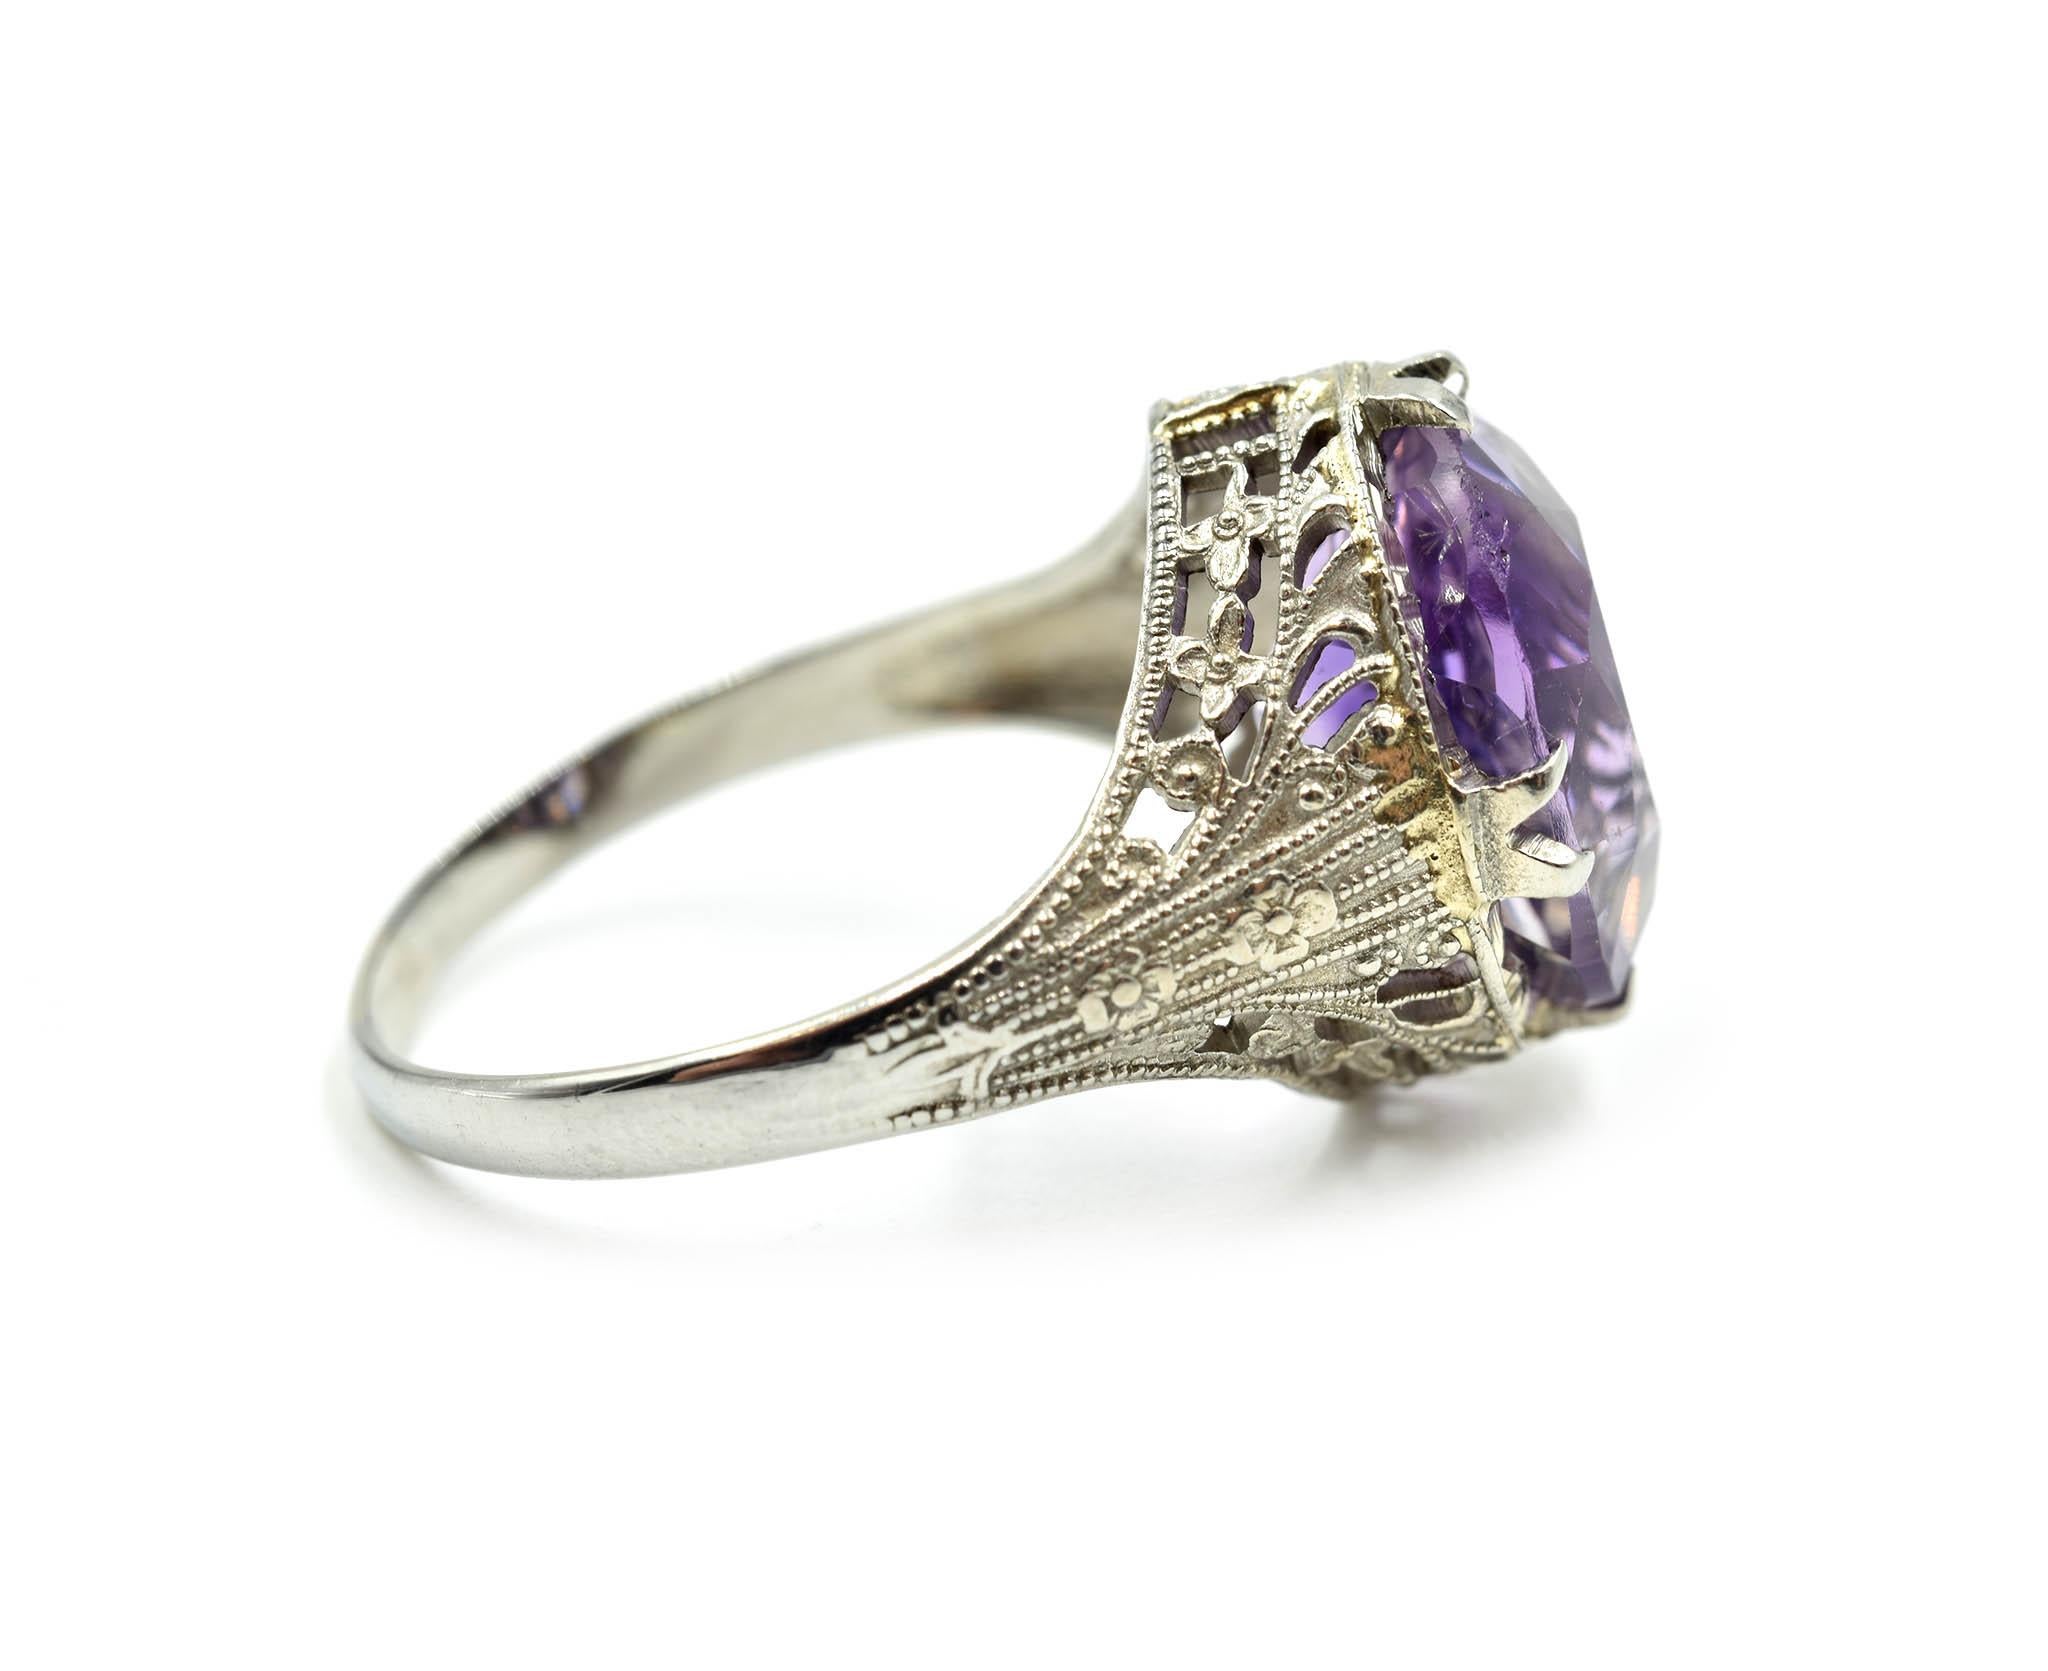 Designer: custom design
Material: 18k white gold
Amethyst: oval cut amethyst 4.52 carat weight
Dimensions: ring top is 13.51mm long and 11.50mm wide
Ring Size: 7
Weight: 3.74 grams
